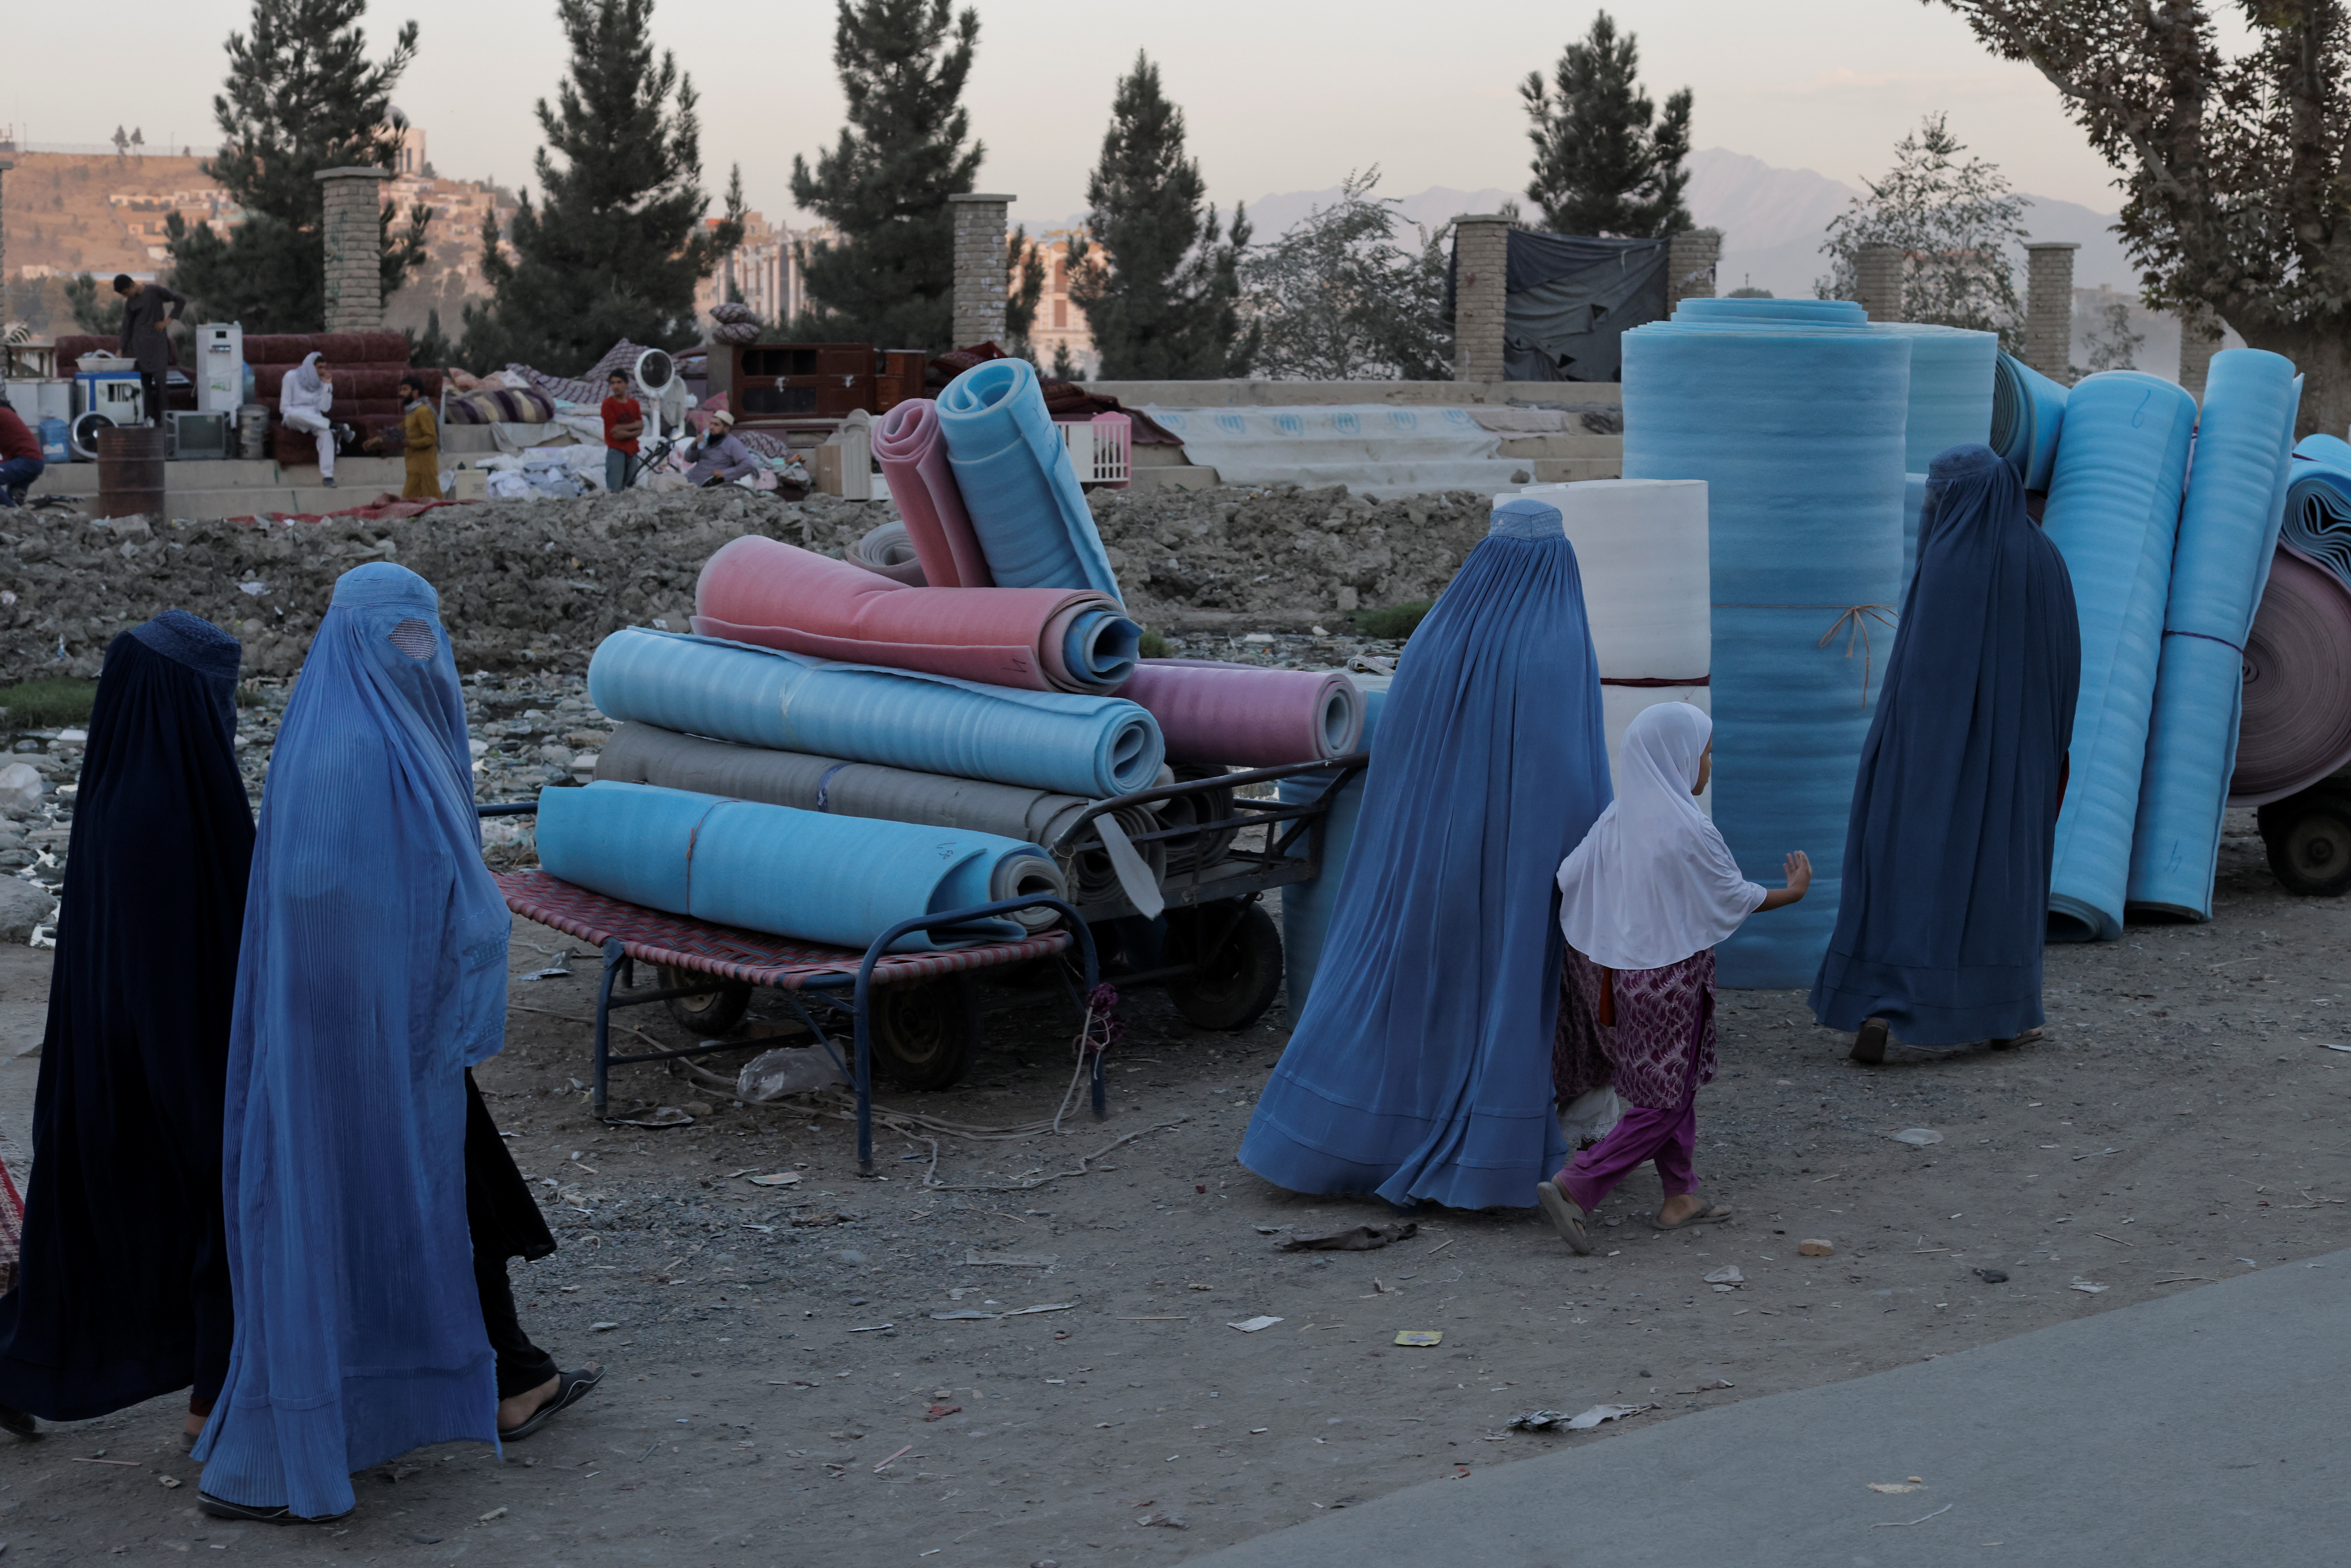 Women wearing burqas walk in a second-hand market where people sell their home appliances and other belongings, in Kabul, Afghanistan October 9, 2021. REUTERS/Jorge Silva